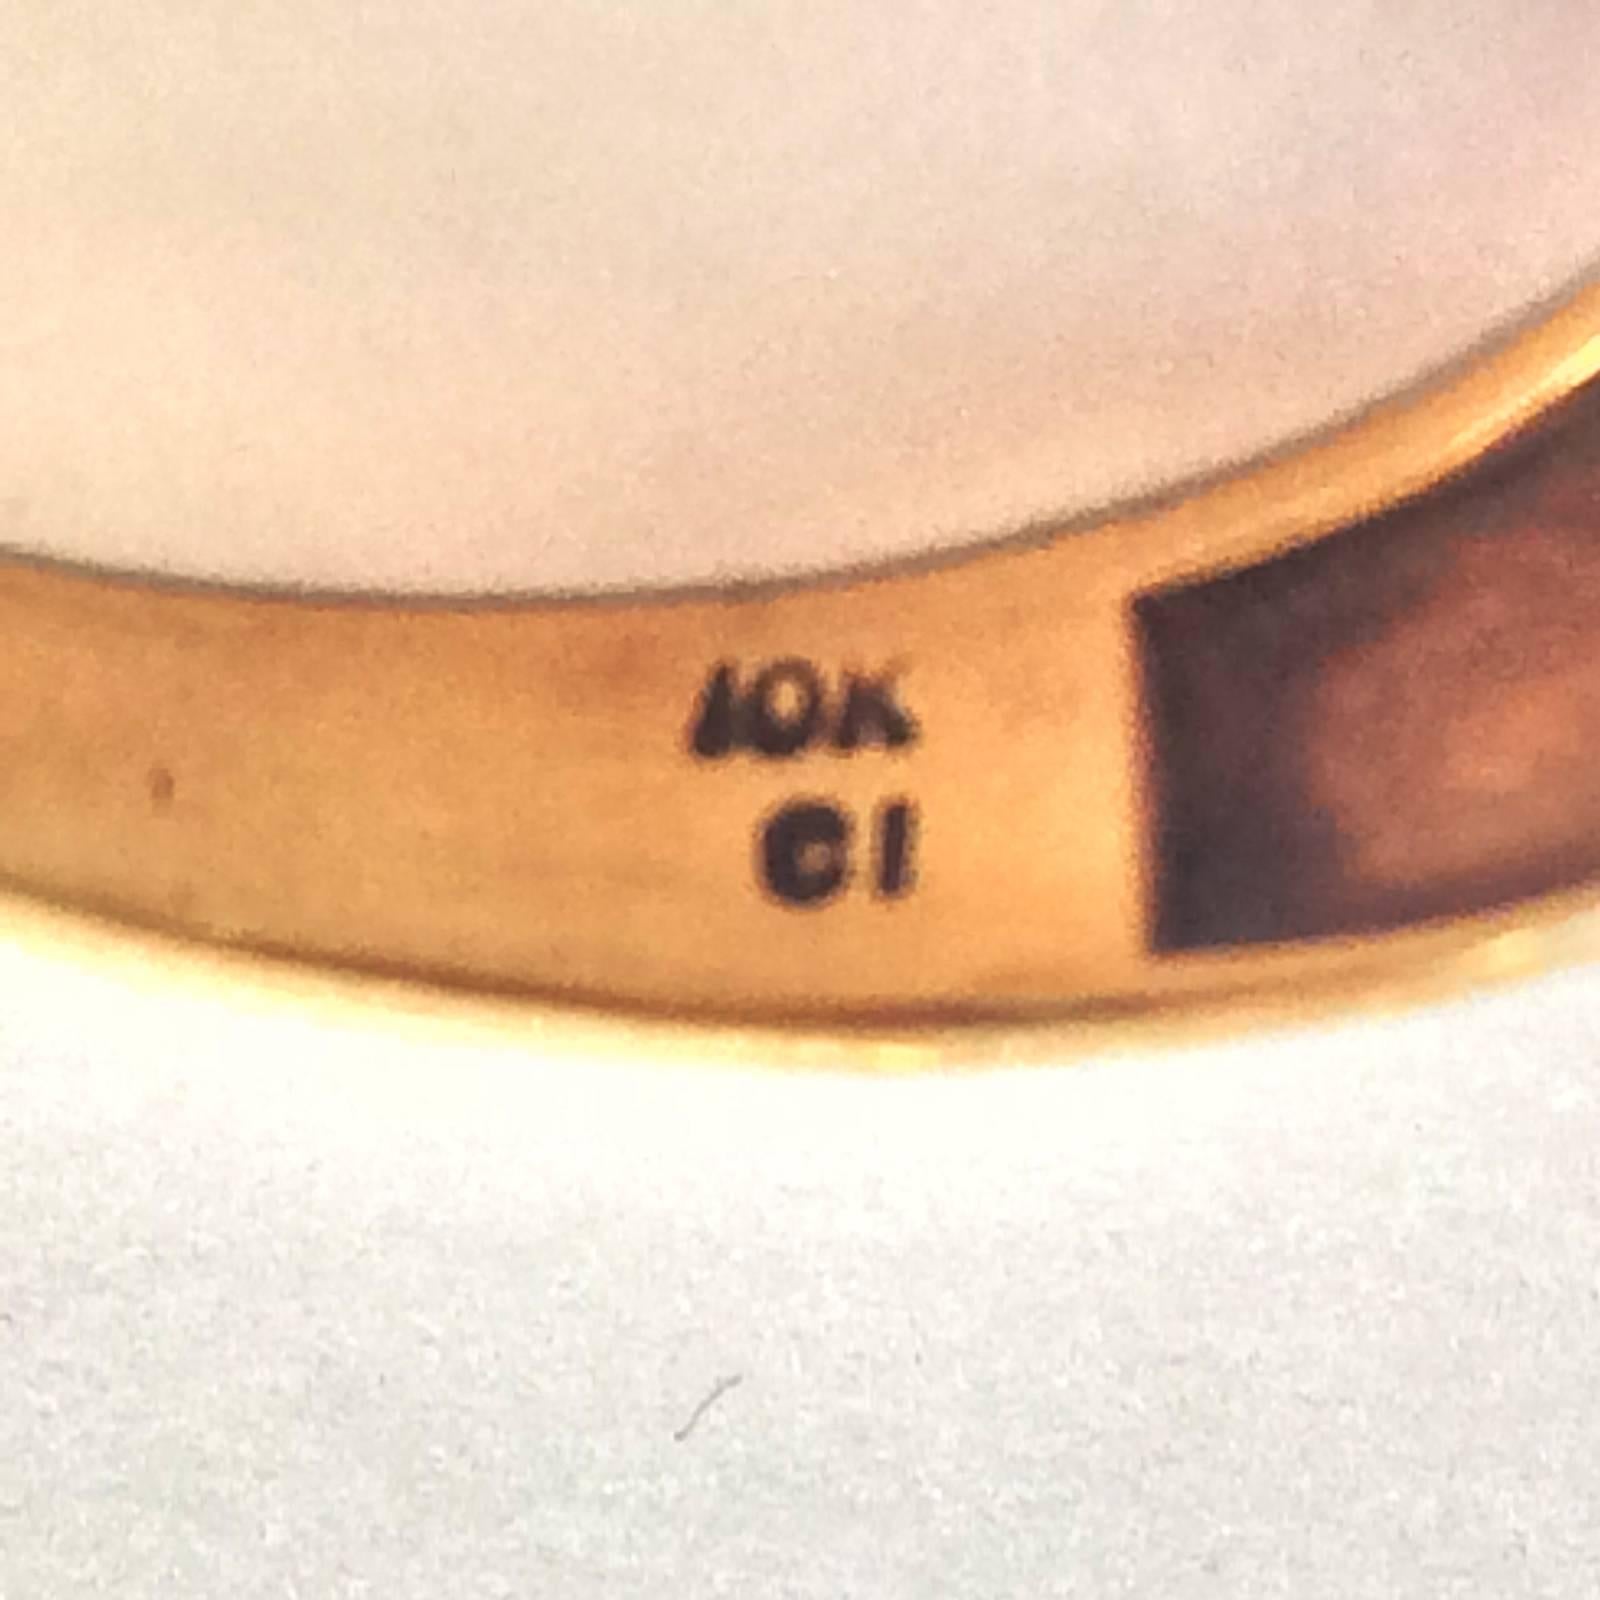 Art Deco Signet Ring in 10k Gold as hallmarked to rear, set with a Natural Emerald, oval cut, with reeded finish to gold shoulders, top with 2 small diamonds to each shoulder as well. Also Hallmarked CI beside the Gold Mark, probably Jeweller’s